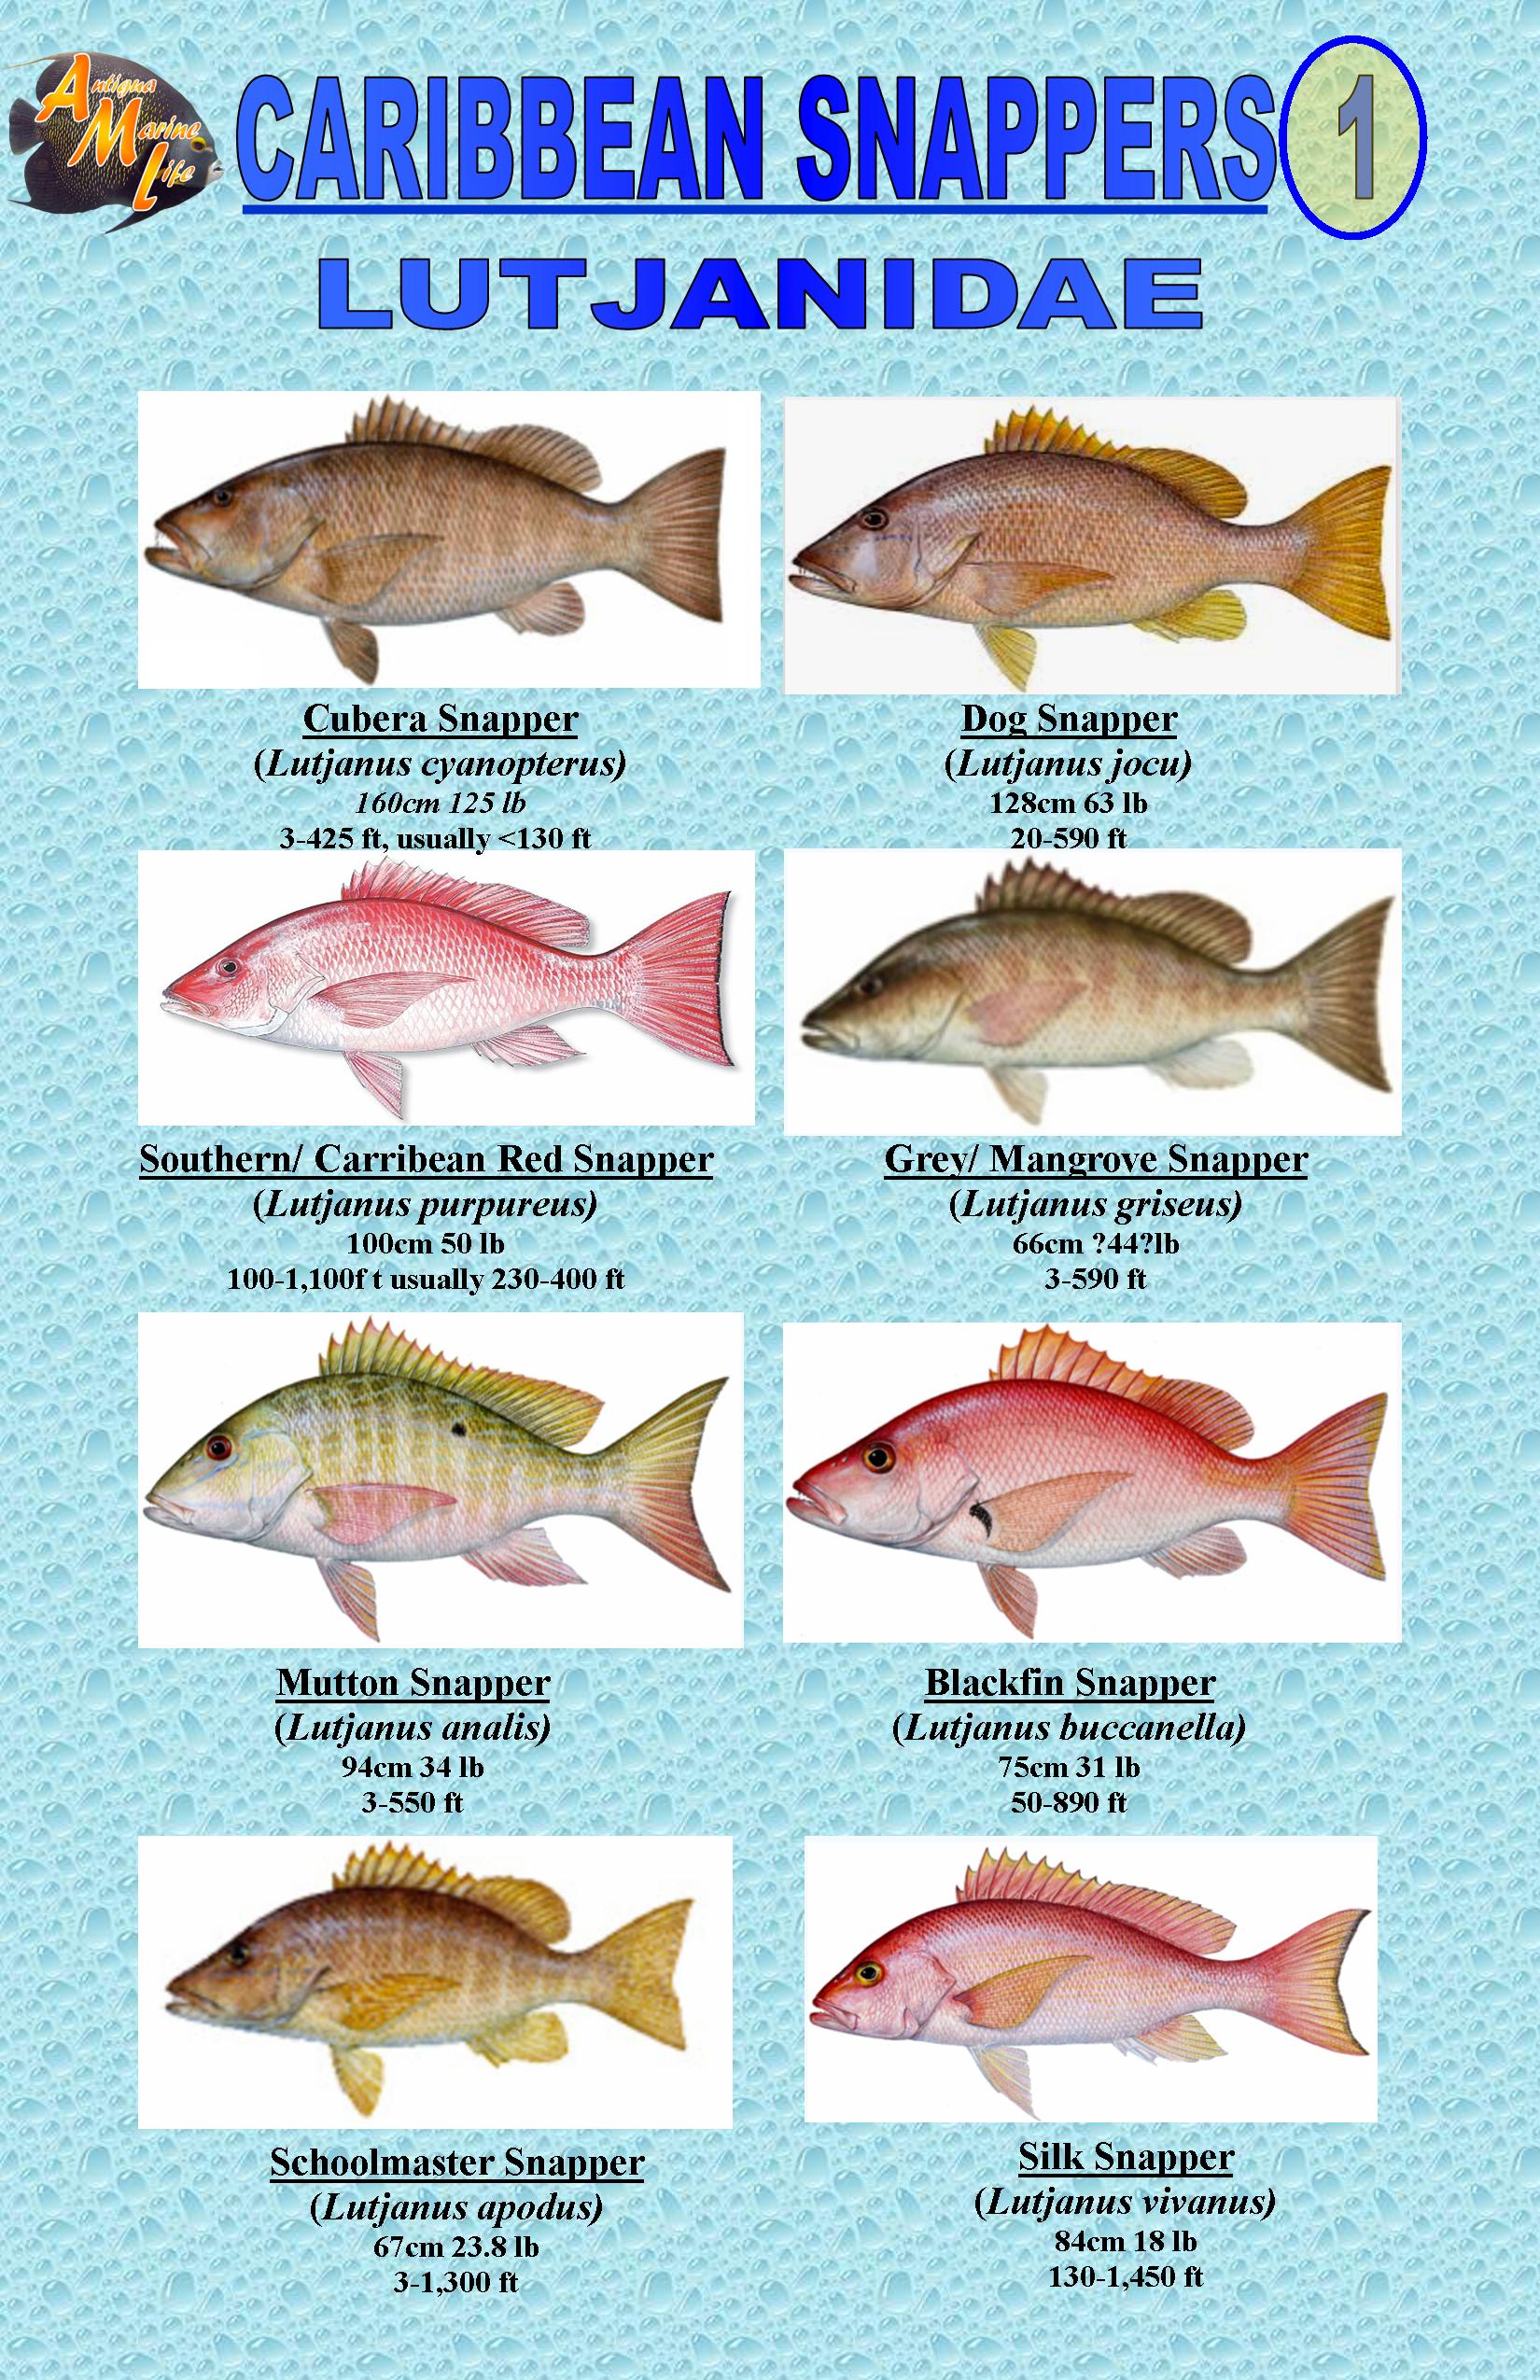 CARIBBEAN SNAPPERS